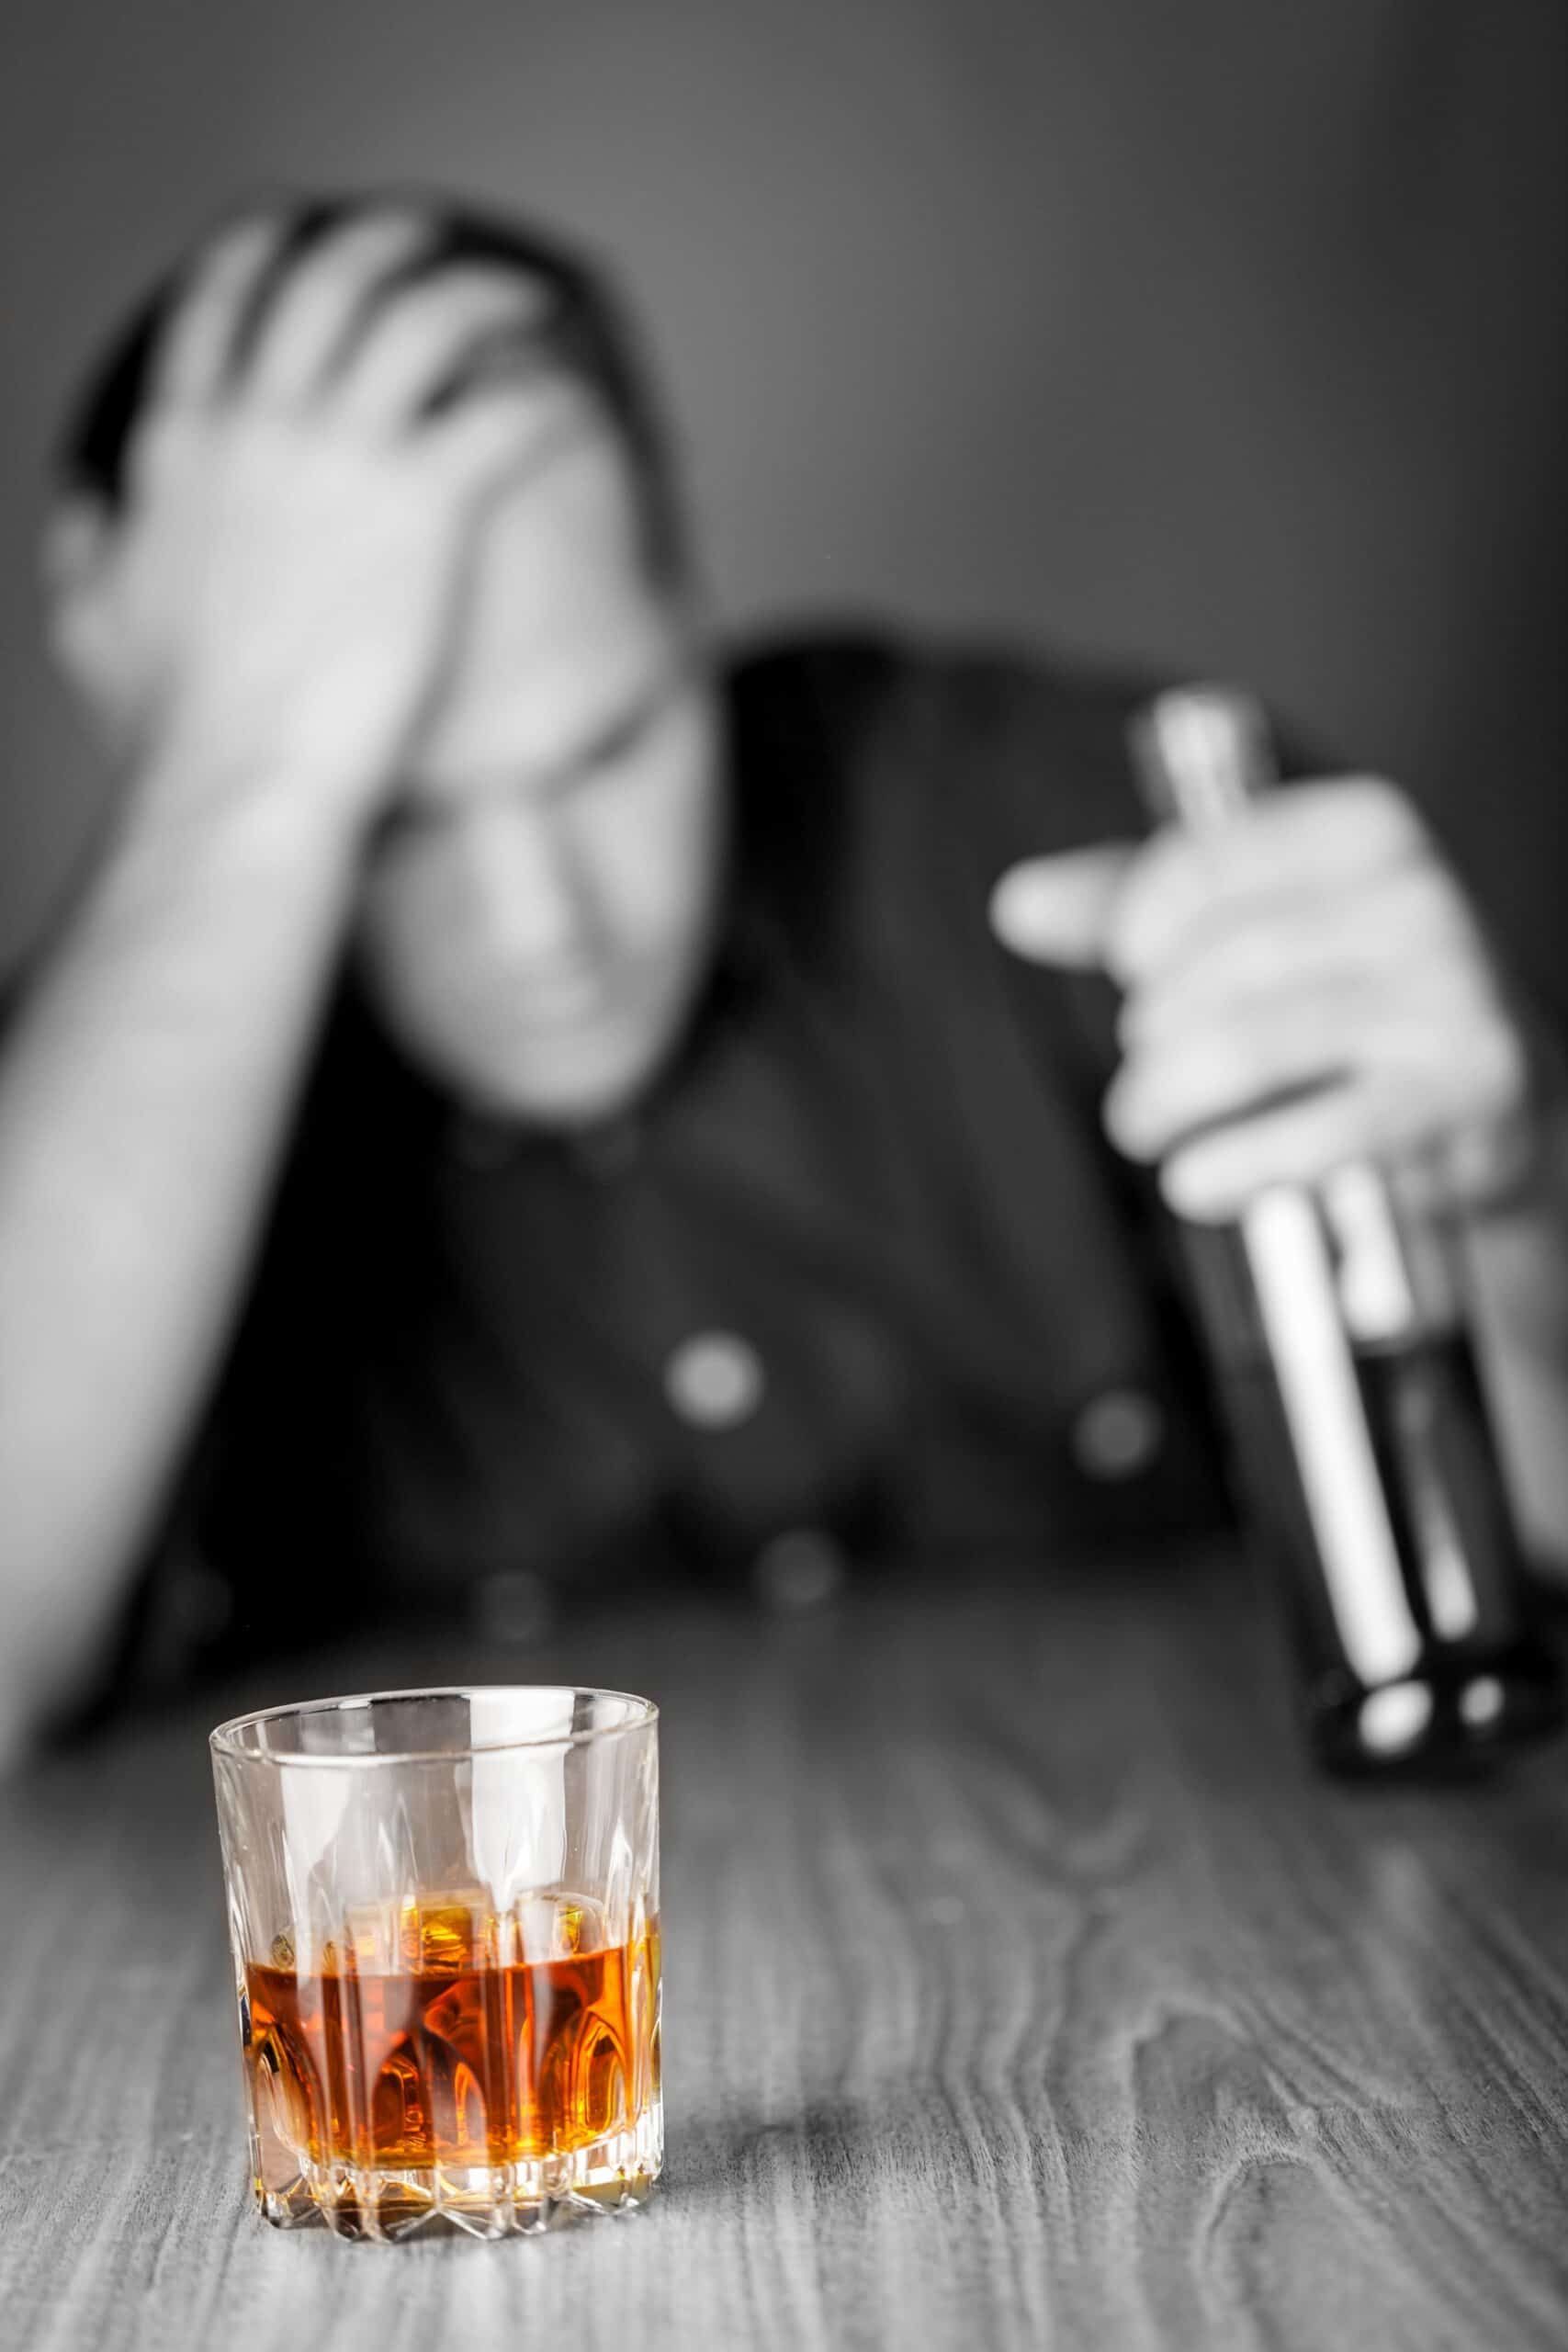 A man struggling with addiction to alcohol.